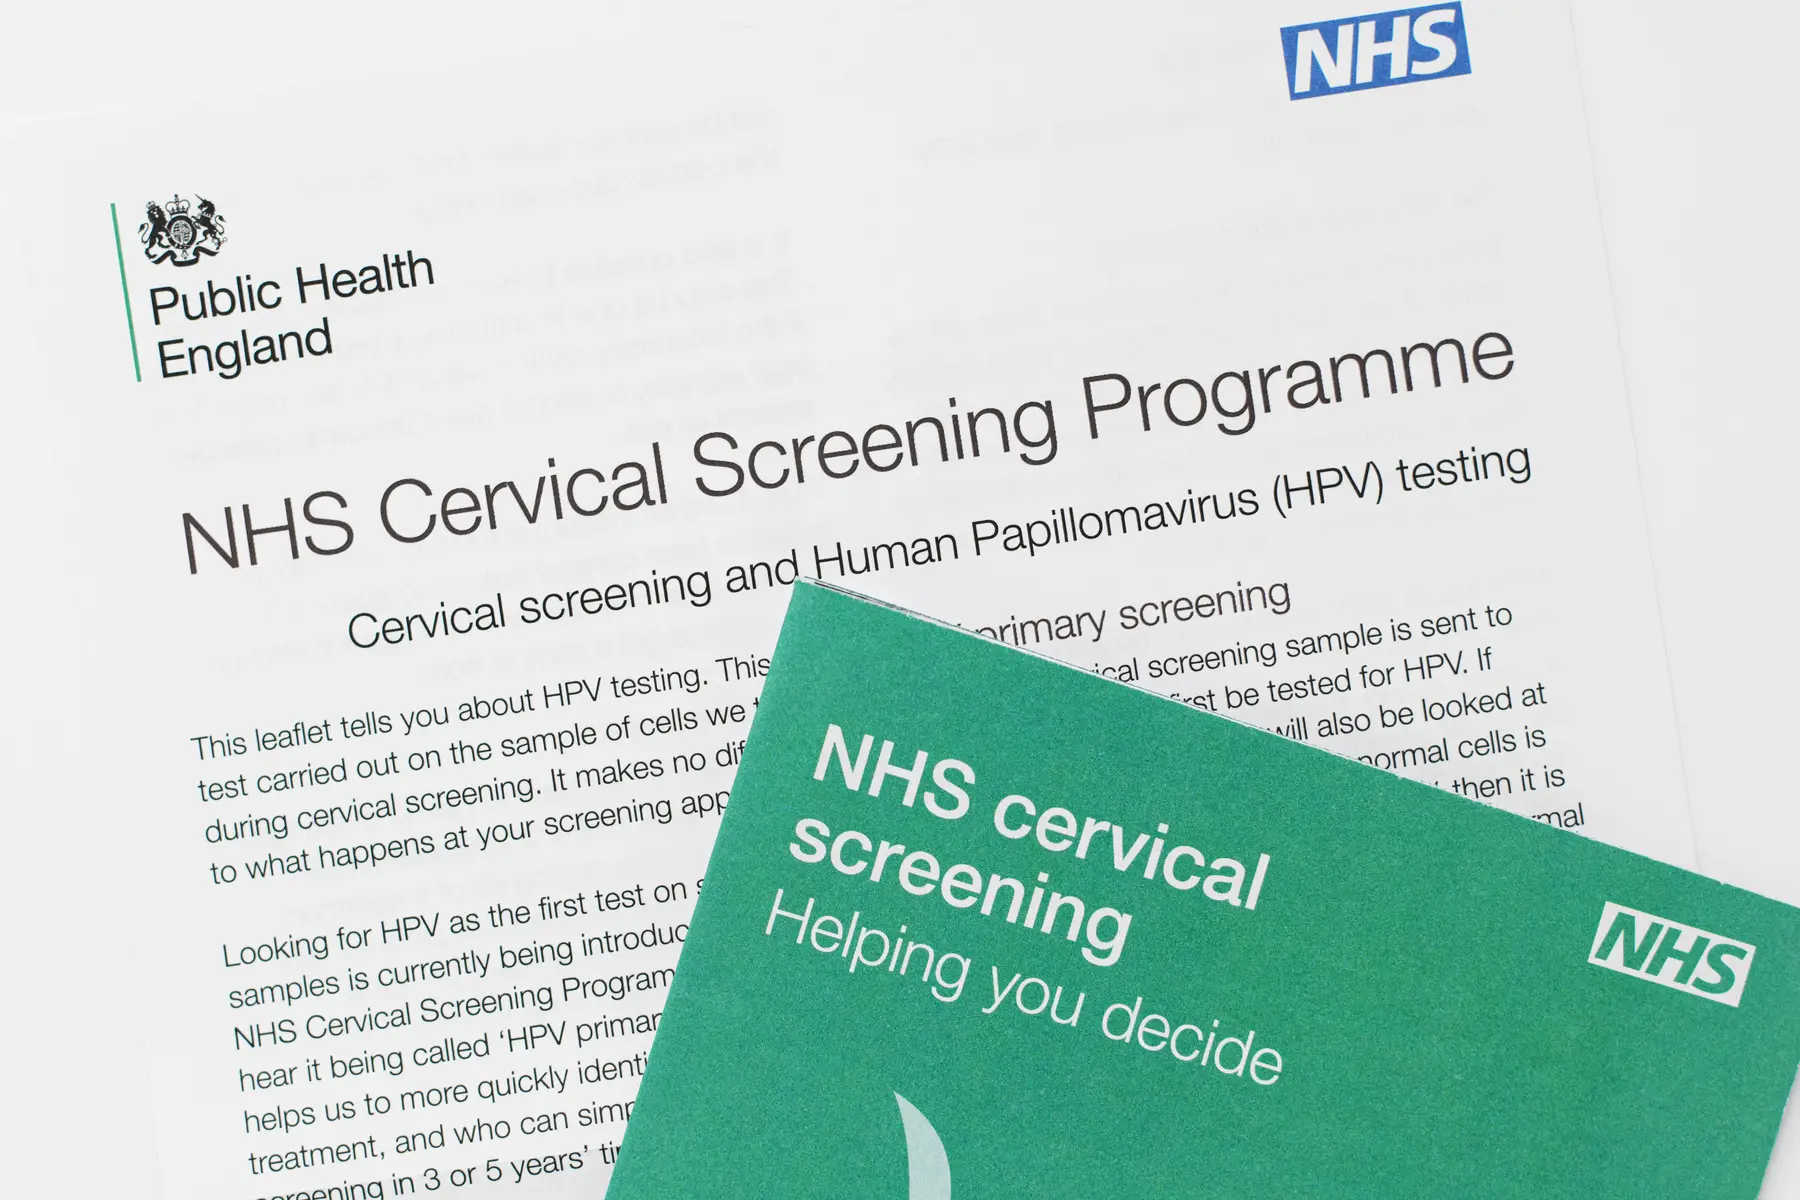 Cervical screening information letter and booklet from the NHS